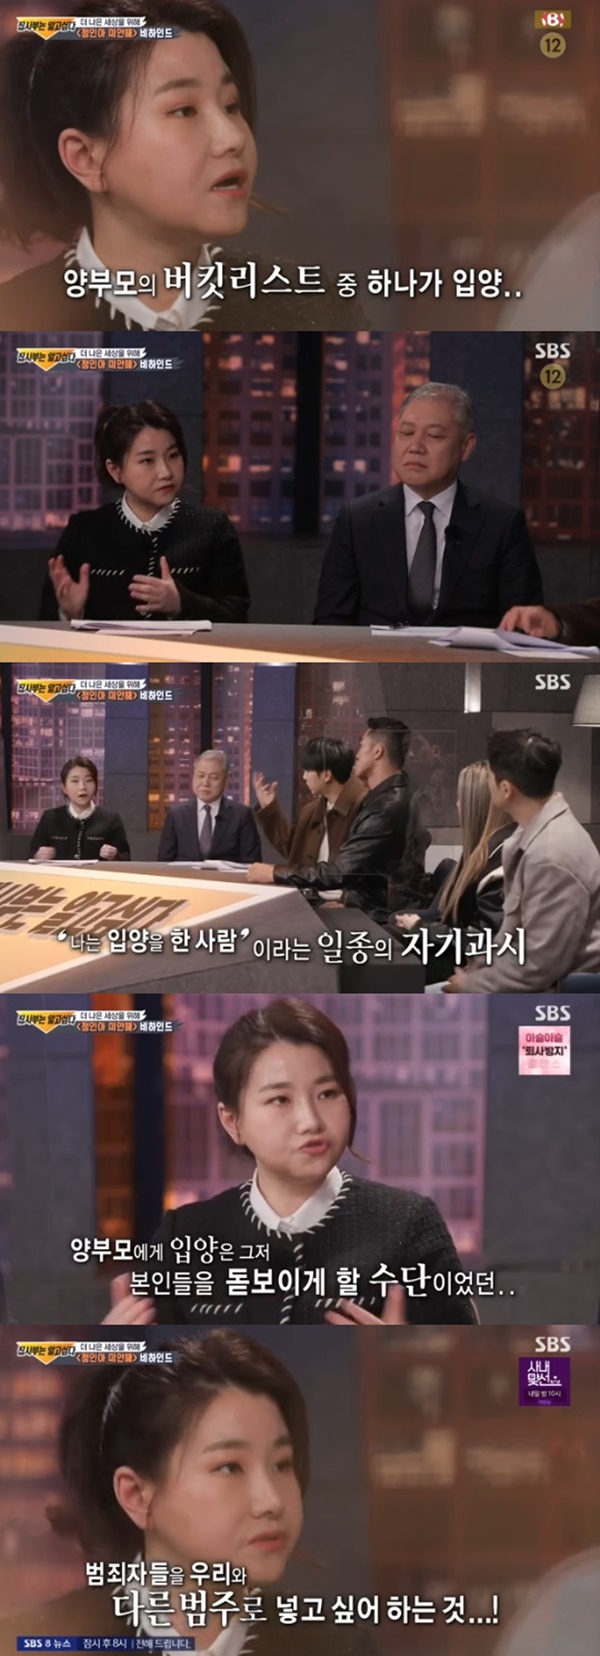 All The Butlers Park Ji-sun reveals Choi Jung-ins incident adoptive parents used adoption as a showdown SudanSBS entertainment program All The Butlers, which was broadcast on the 27th, was featured in the 30th anniversary feature of I Know It (hereinafter referred to as Gal), and featured profiler Kwon Il-yong, criminal psychologists Park Ji-sun, Do Jun-woo and Dong Won PD.Park Ji-sun mentioned the Choi Jung-in incident that was discussed in Gal.Choi Jung-ins case is a case in which Choi Jung-in, who was 16 months old, died 271 days after adoption due to child abuse.In this regard, Park Ji-sun said, Choi Jung-in was one of the Rob Reiners of adoptive parents.I used it as a showy Sudan, I adopted, rather than considering the difficulties that arise when raising a child. Even if people do not ask, the adoptive parents first said, We are adopted children.Also, Park Ji-sun explained that child abuse cases are common around us.He said: When these events happen, people demonize the criminals in the case and describe them as Bereavement.But if you look at the base, you do not want to recognize it as one of us.  I want to put it in a different category from us. But in fact, there is no explanation for Bereavement, and in fact there are tens of thousands of child abuse, he added.